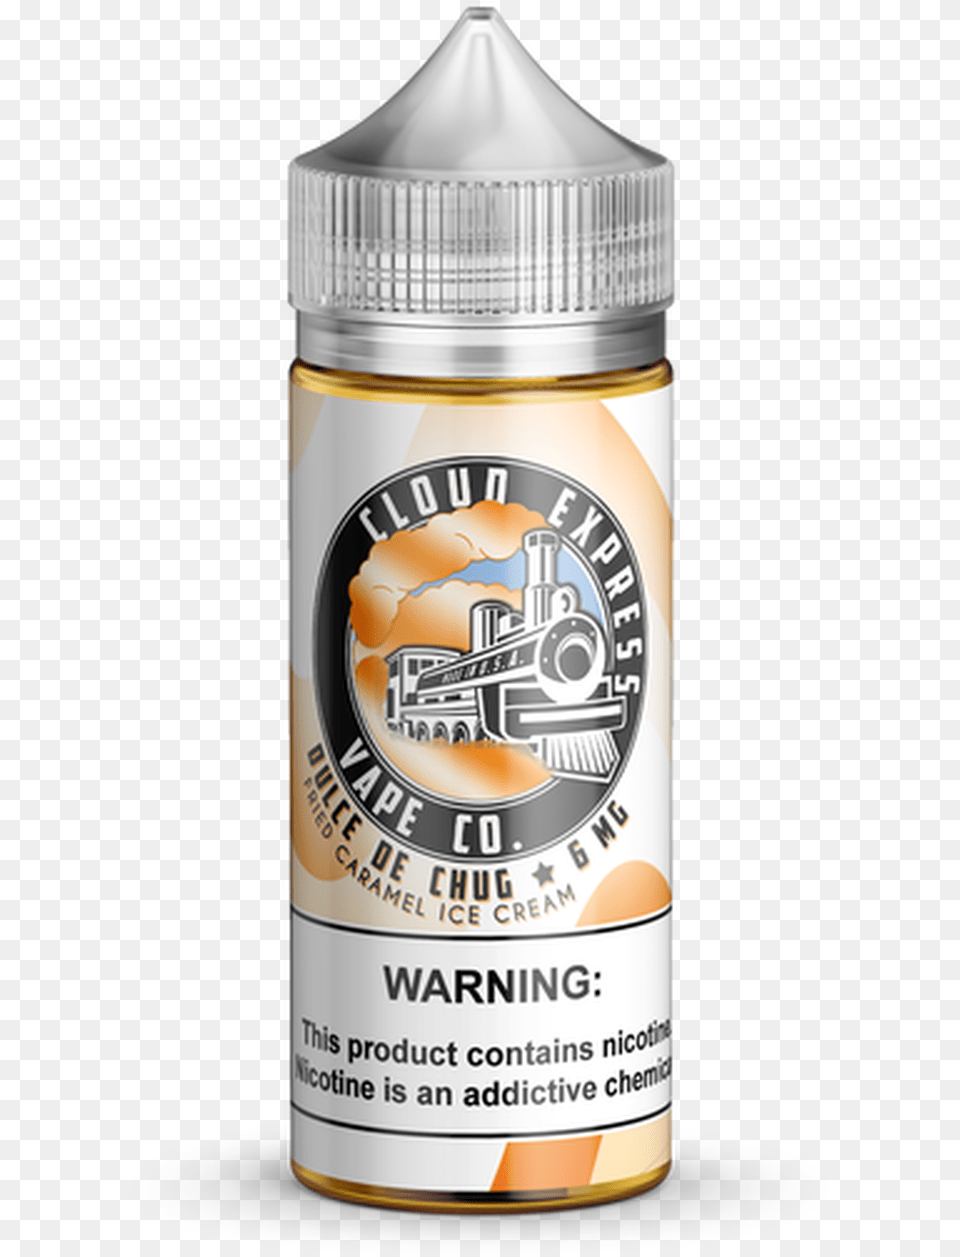 Of Dulce De Chug Vape Juice By Cloud Express Baby Bottle, Alcohol, Beer, Beverage, Cosmetics Png